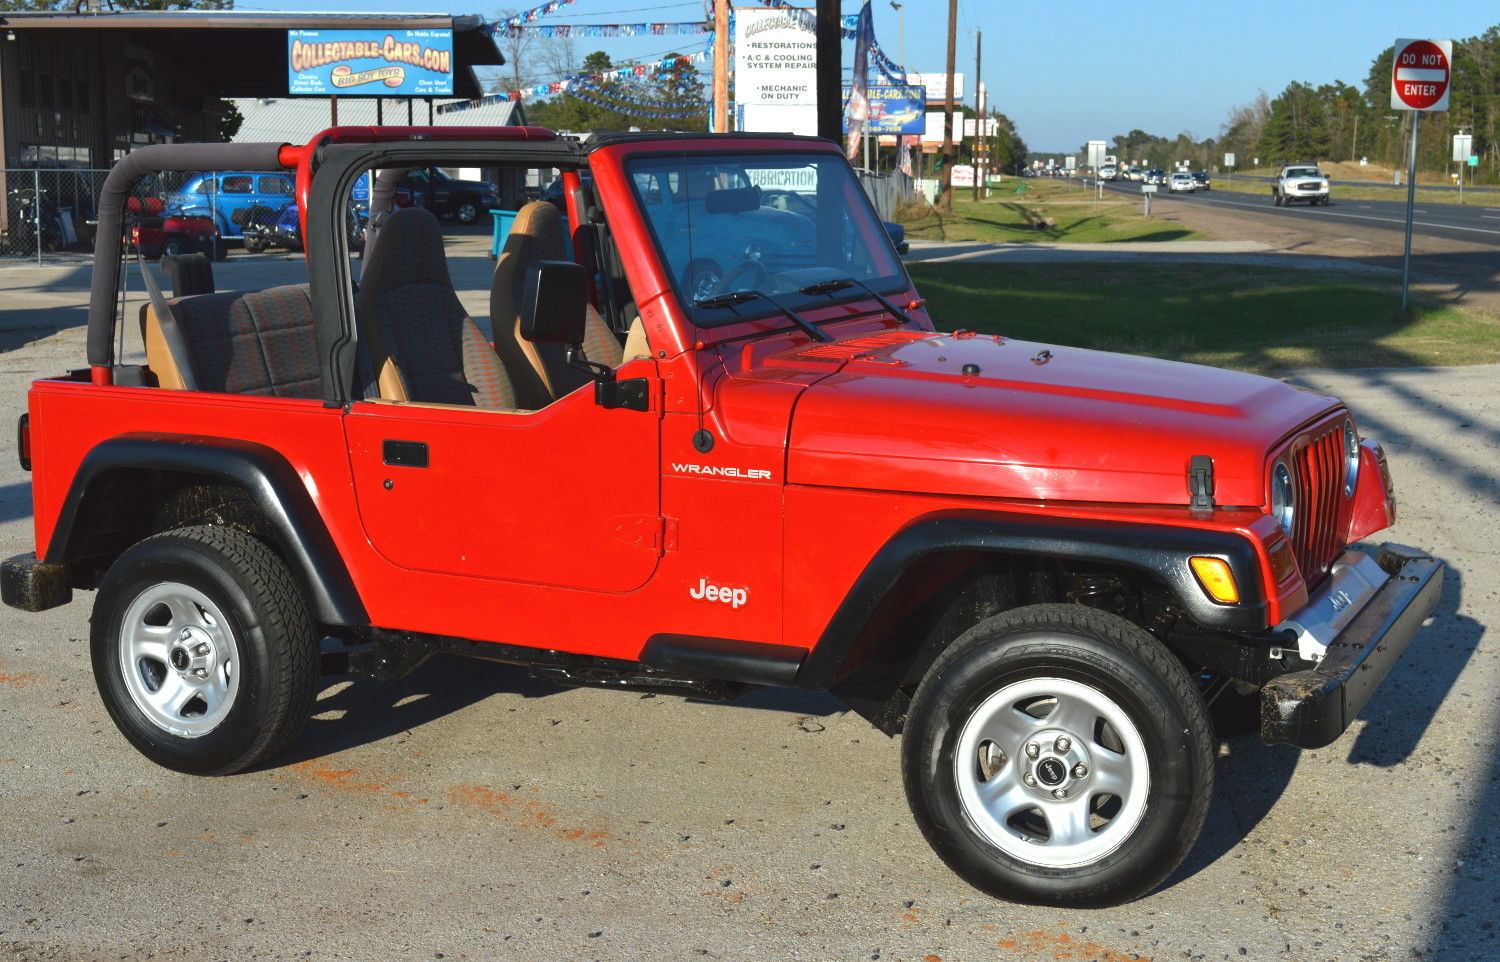 1997 Jeep Wrangler SE 2dr 4WD SUV 1997 Jeep Wrangler SE 2dr 4WD SUV Manual  5-Speed 4WD I4  Gasoline 2022 2023 is in stock and for sale - Price &  Review 2022 2023